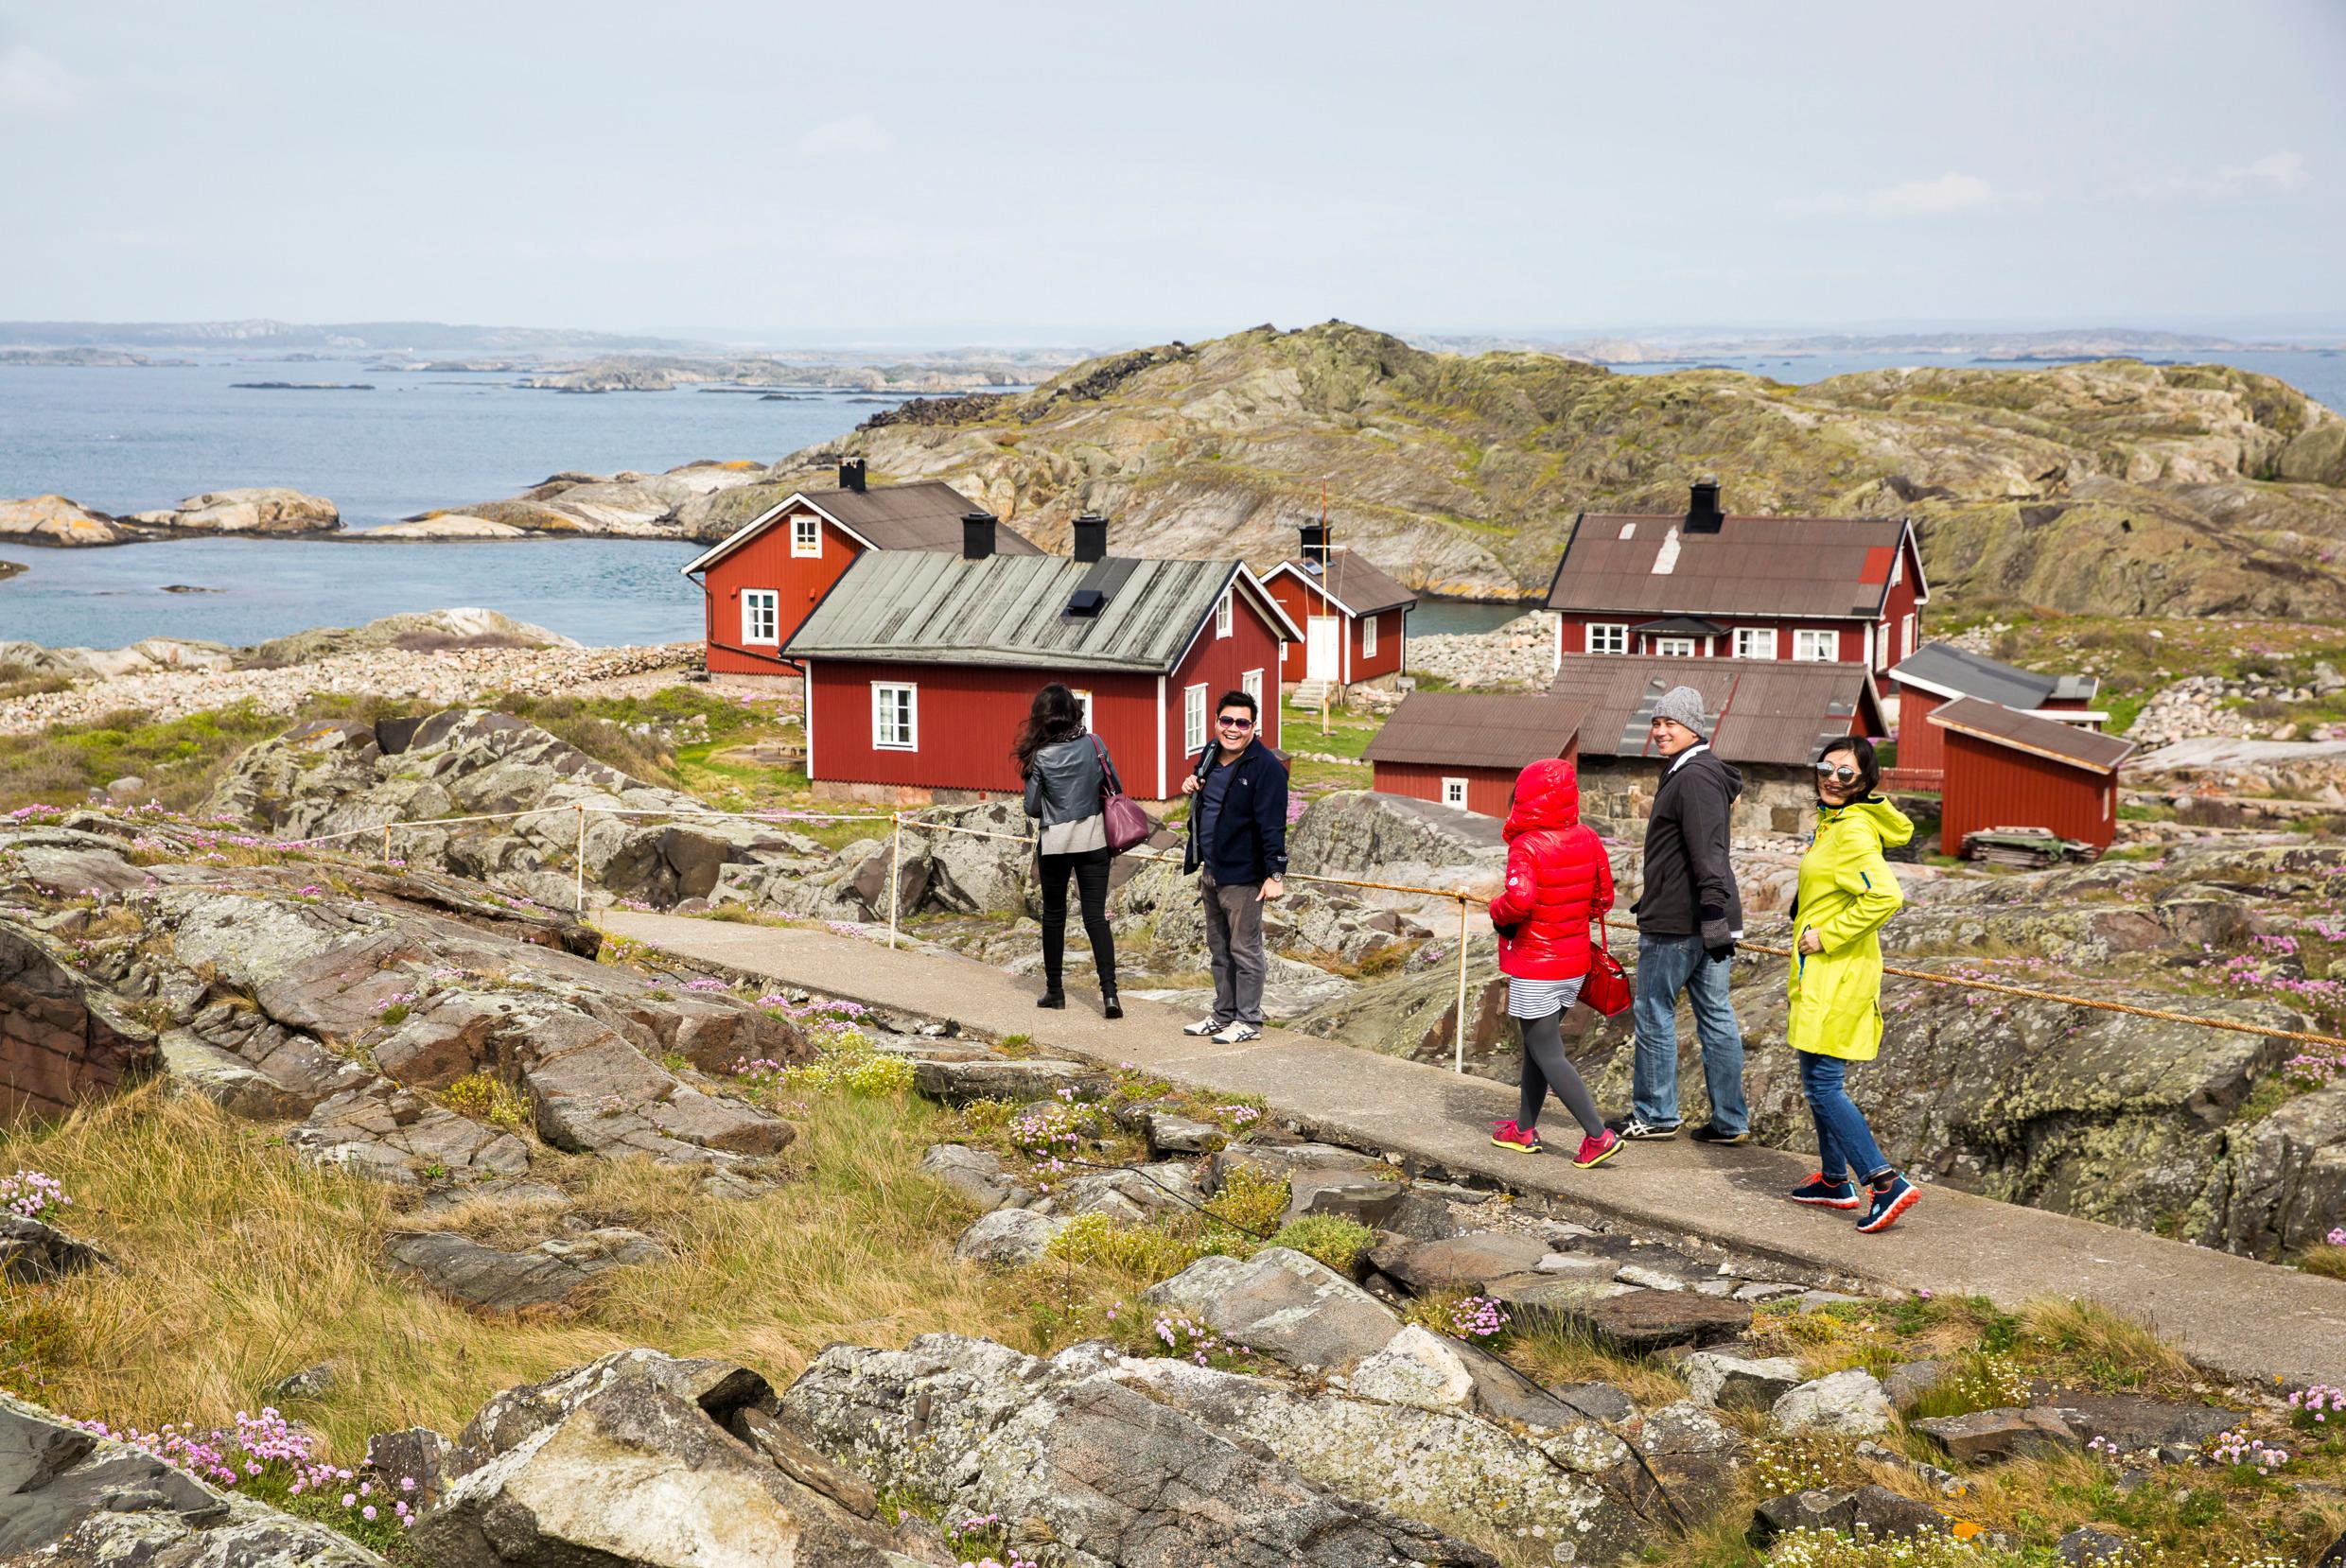 A group of people walk through the rocky island landscape of Kosterhavet National Park, passing a few small red houses. Summer in Sweden can look very different, depending on where you go.